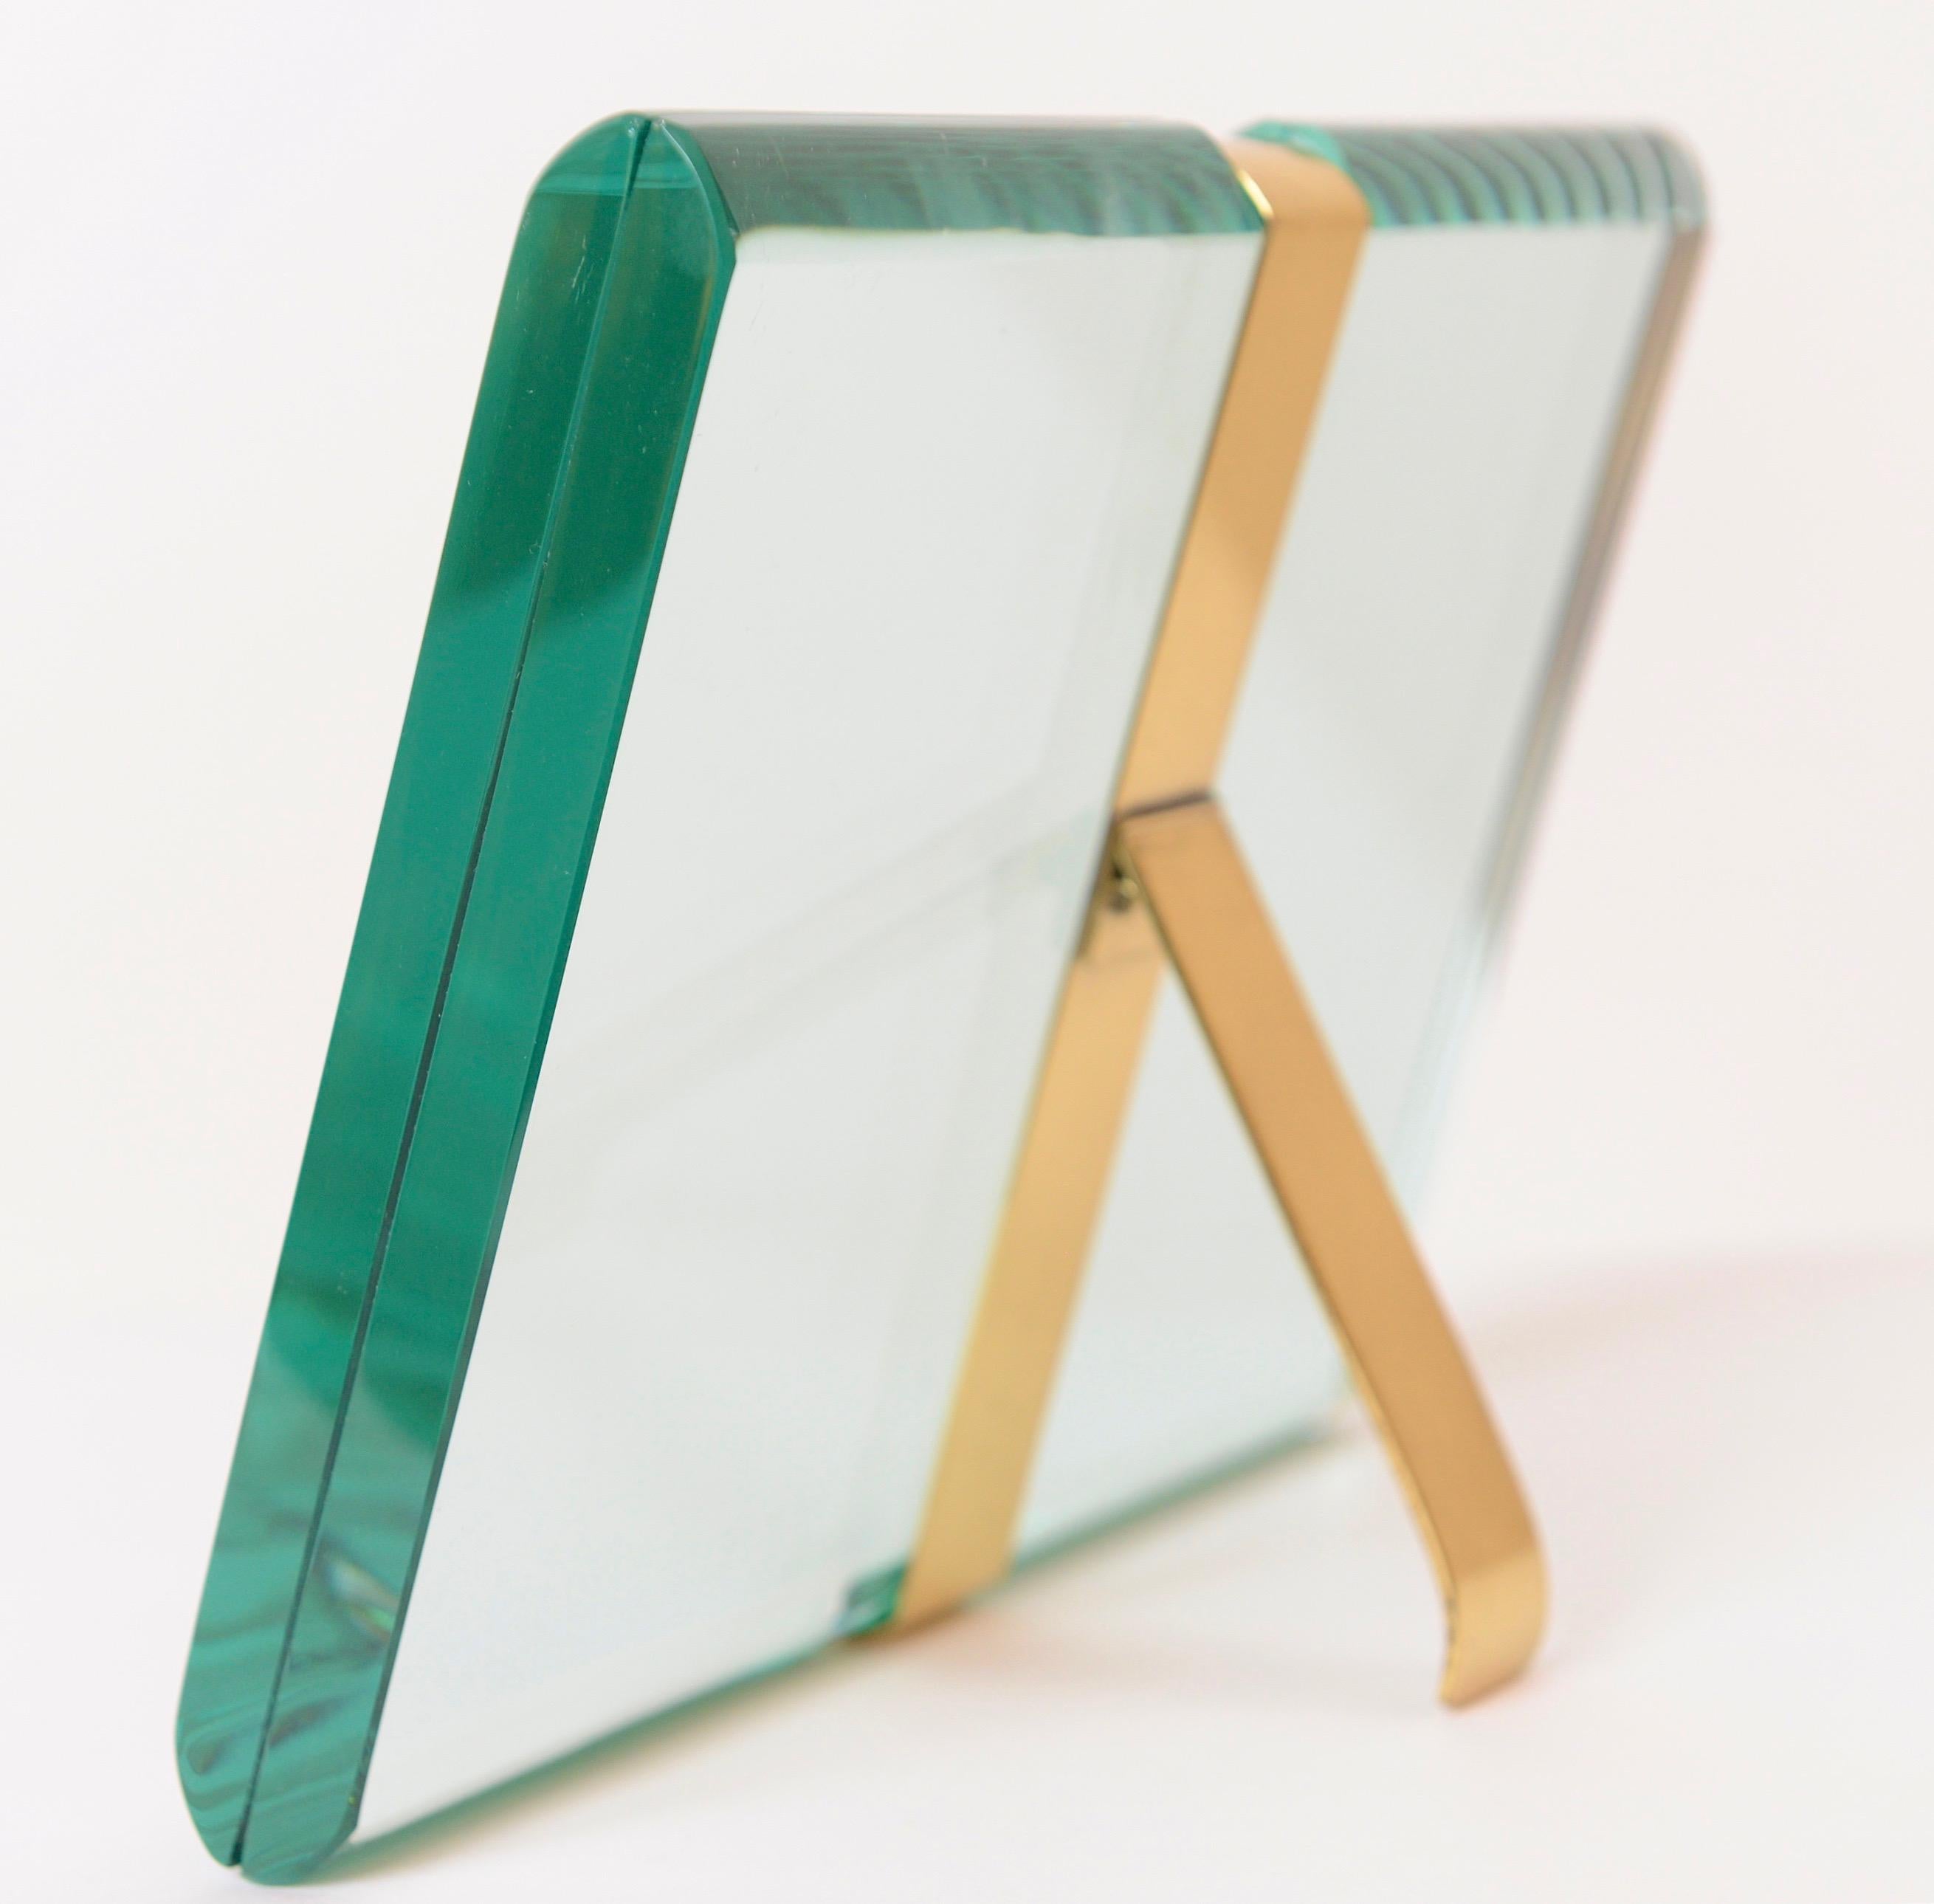 An exquisite pair of St Gobain crystal picture frames designed and produced by the Milanese company, Fontana Arte, in 1955. Each frame has a slender brass fitting and back support which couples the beveled glass plates enabling the user to place a